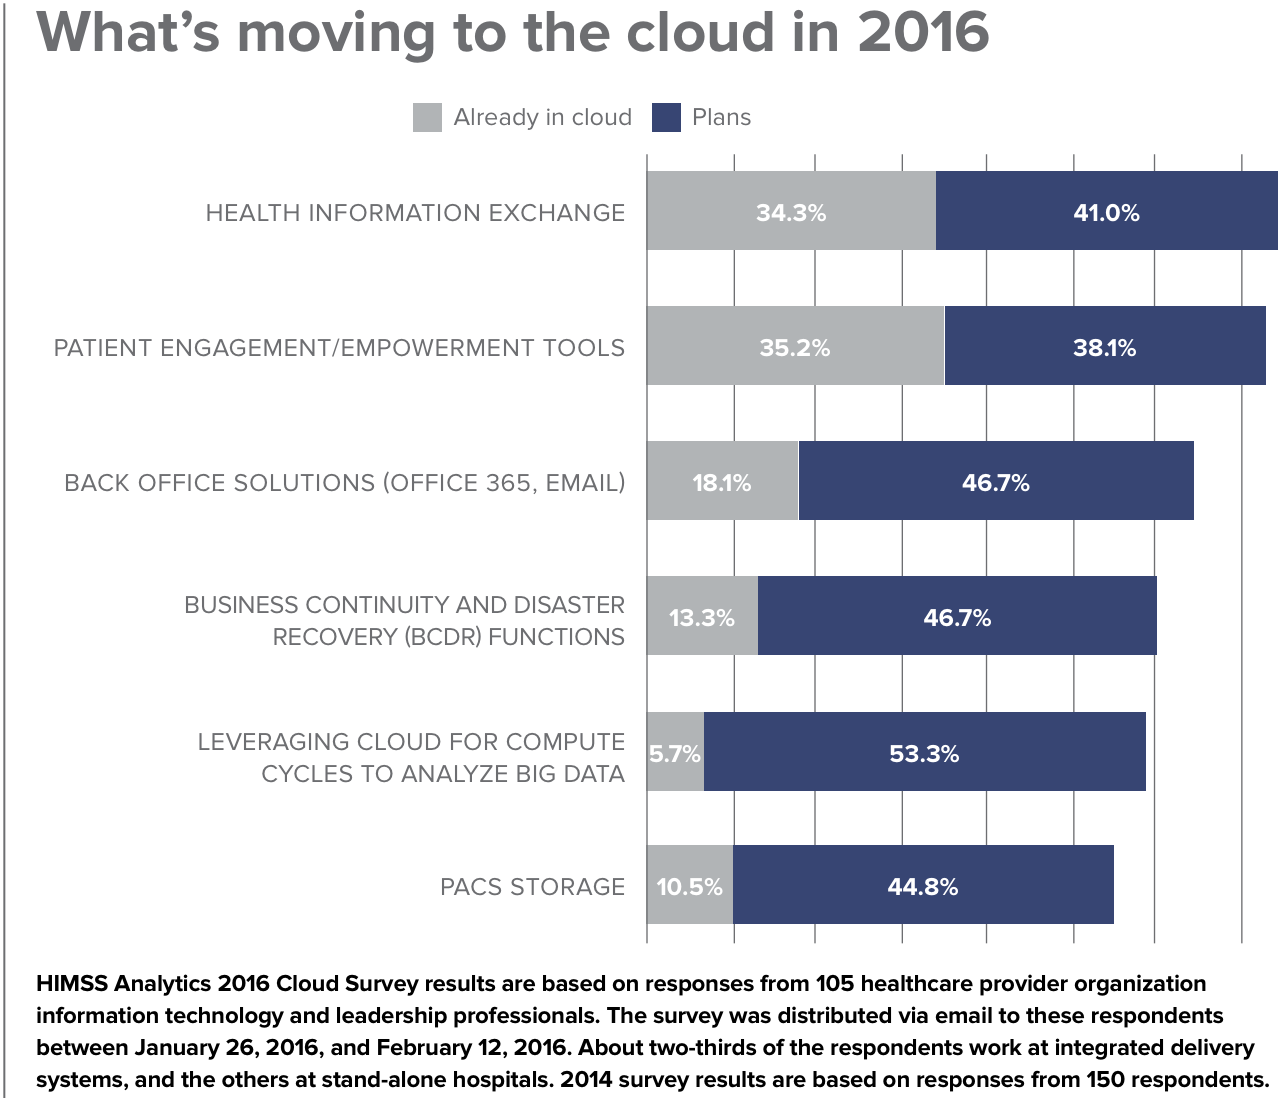 Healthcare is moving to the cloud